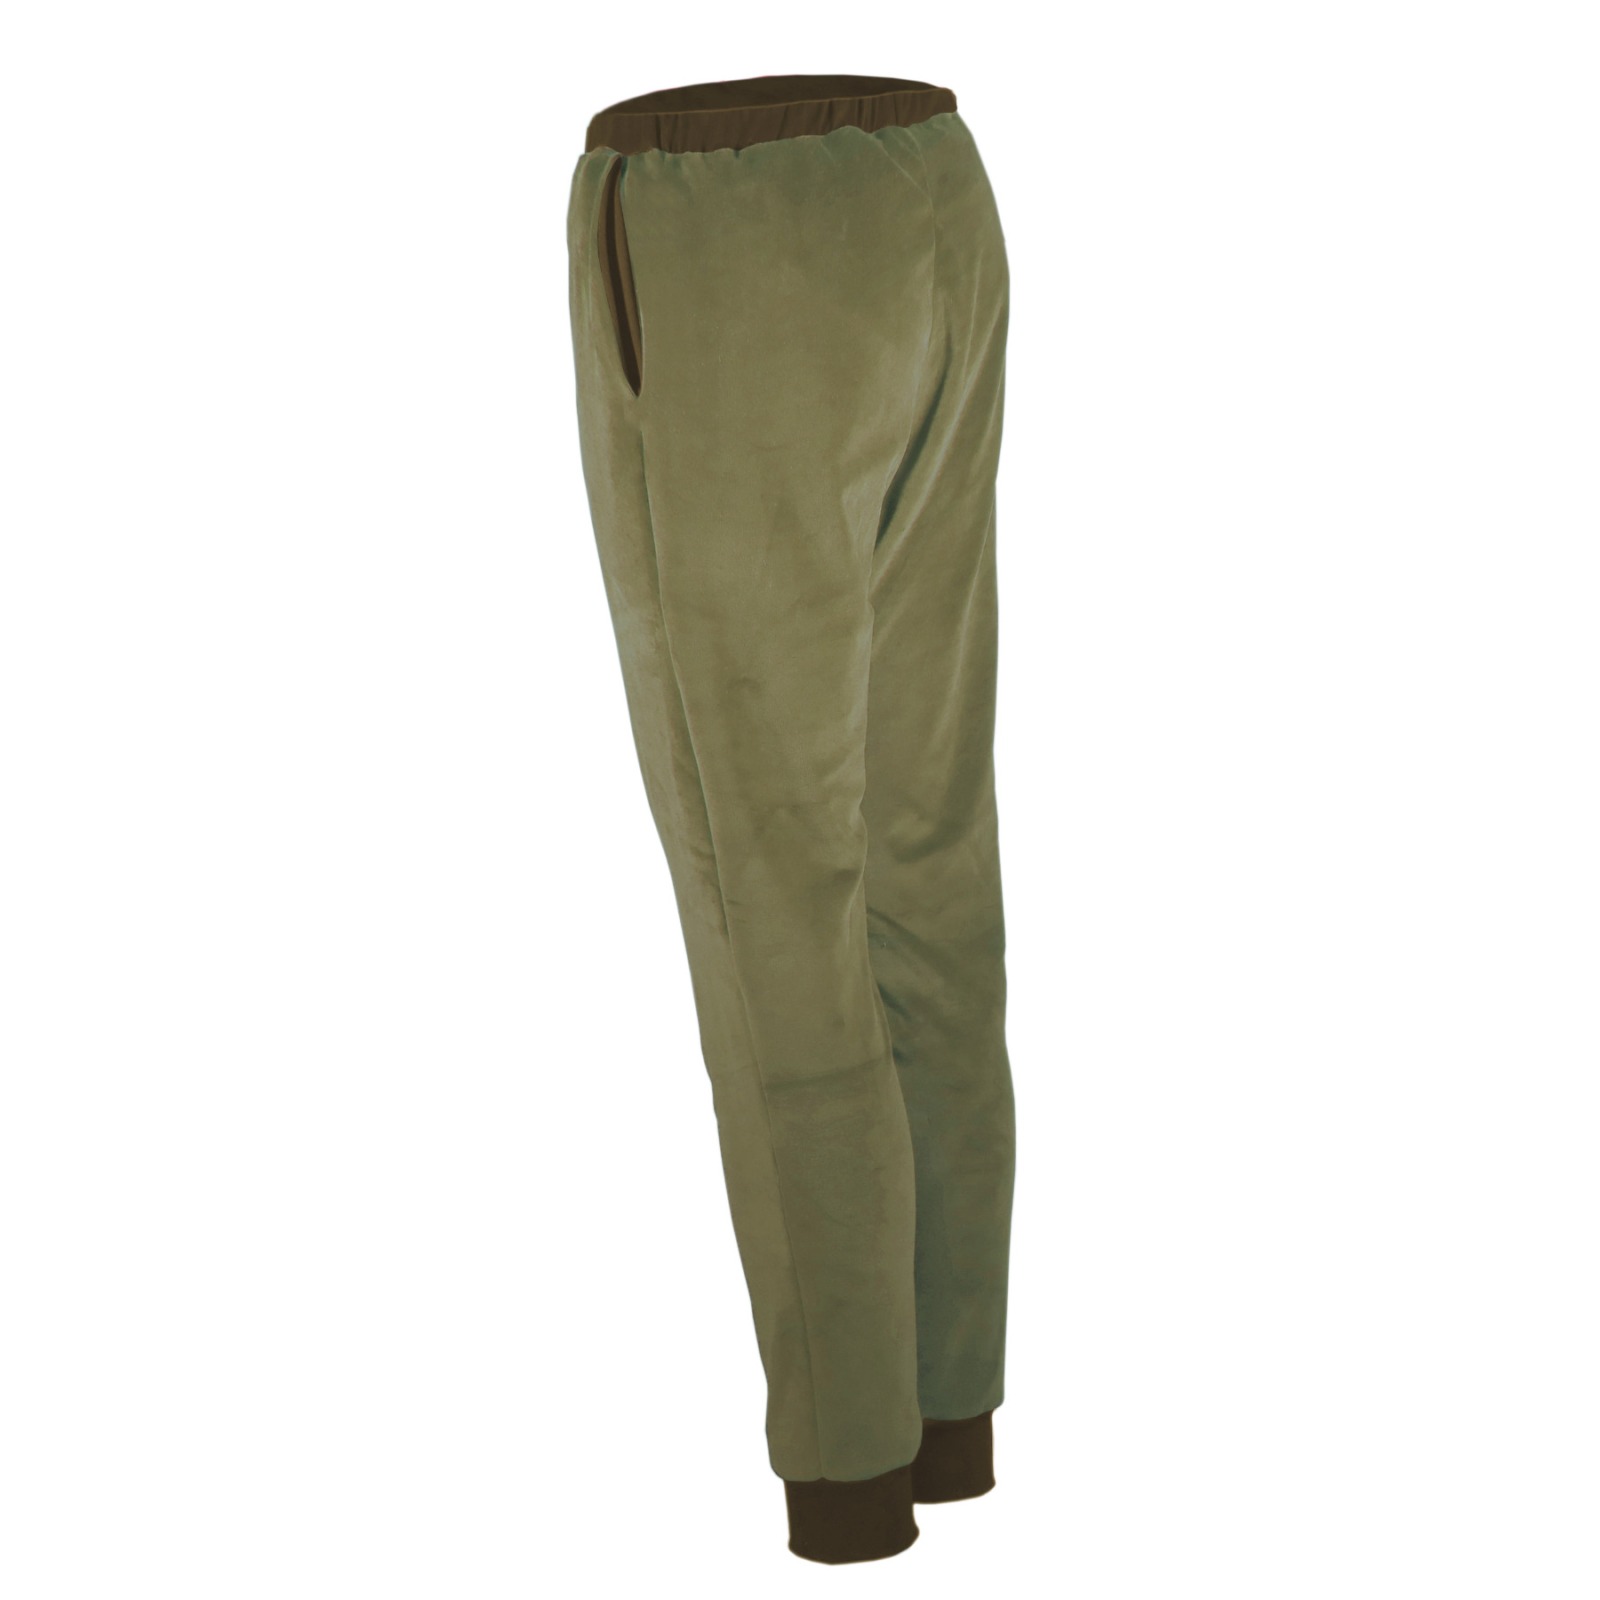 Organic velour pants Hygge olive green / forest 2